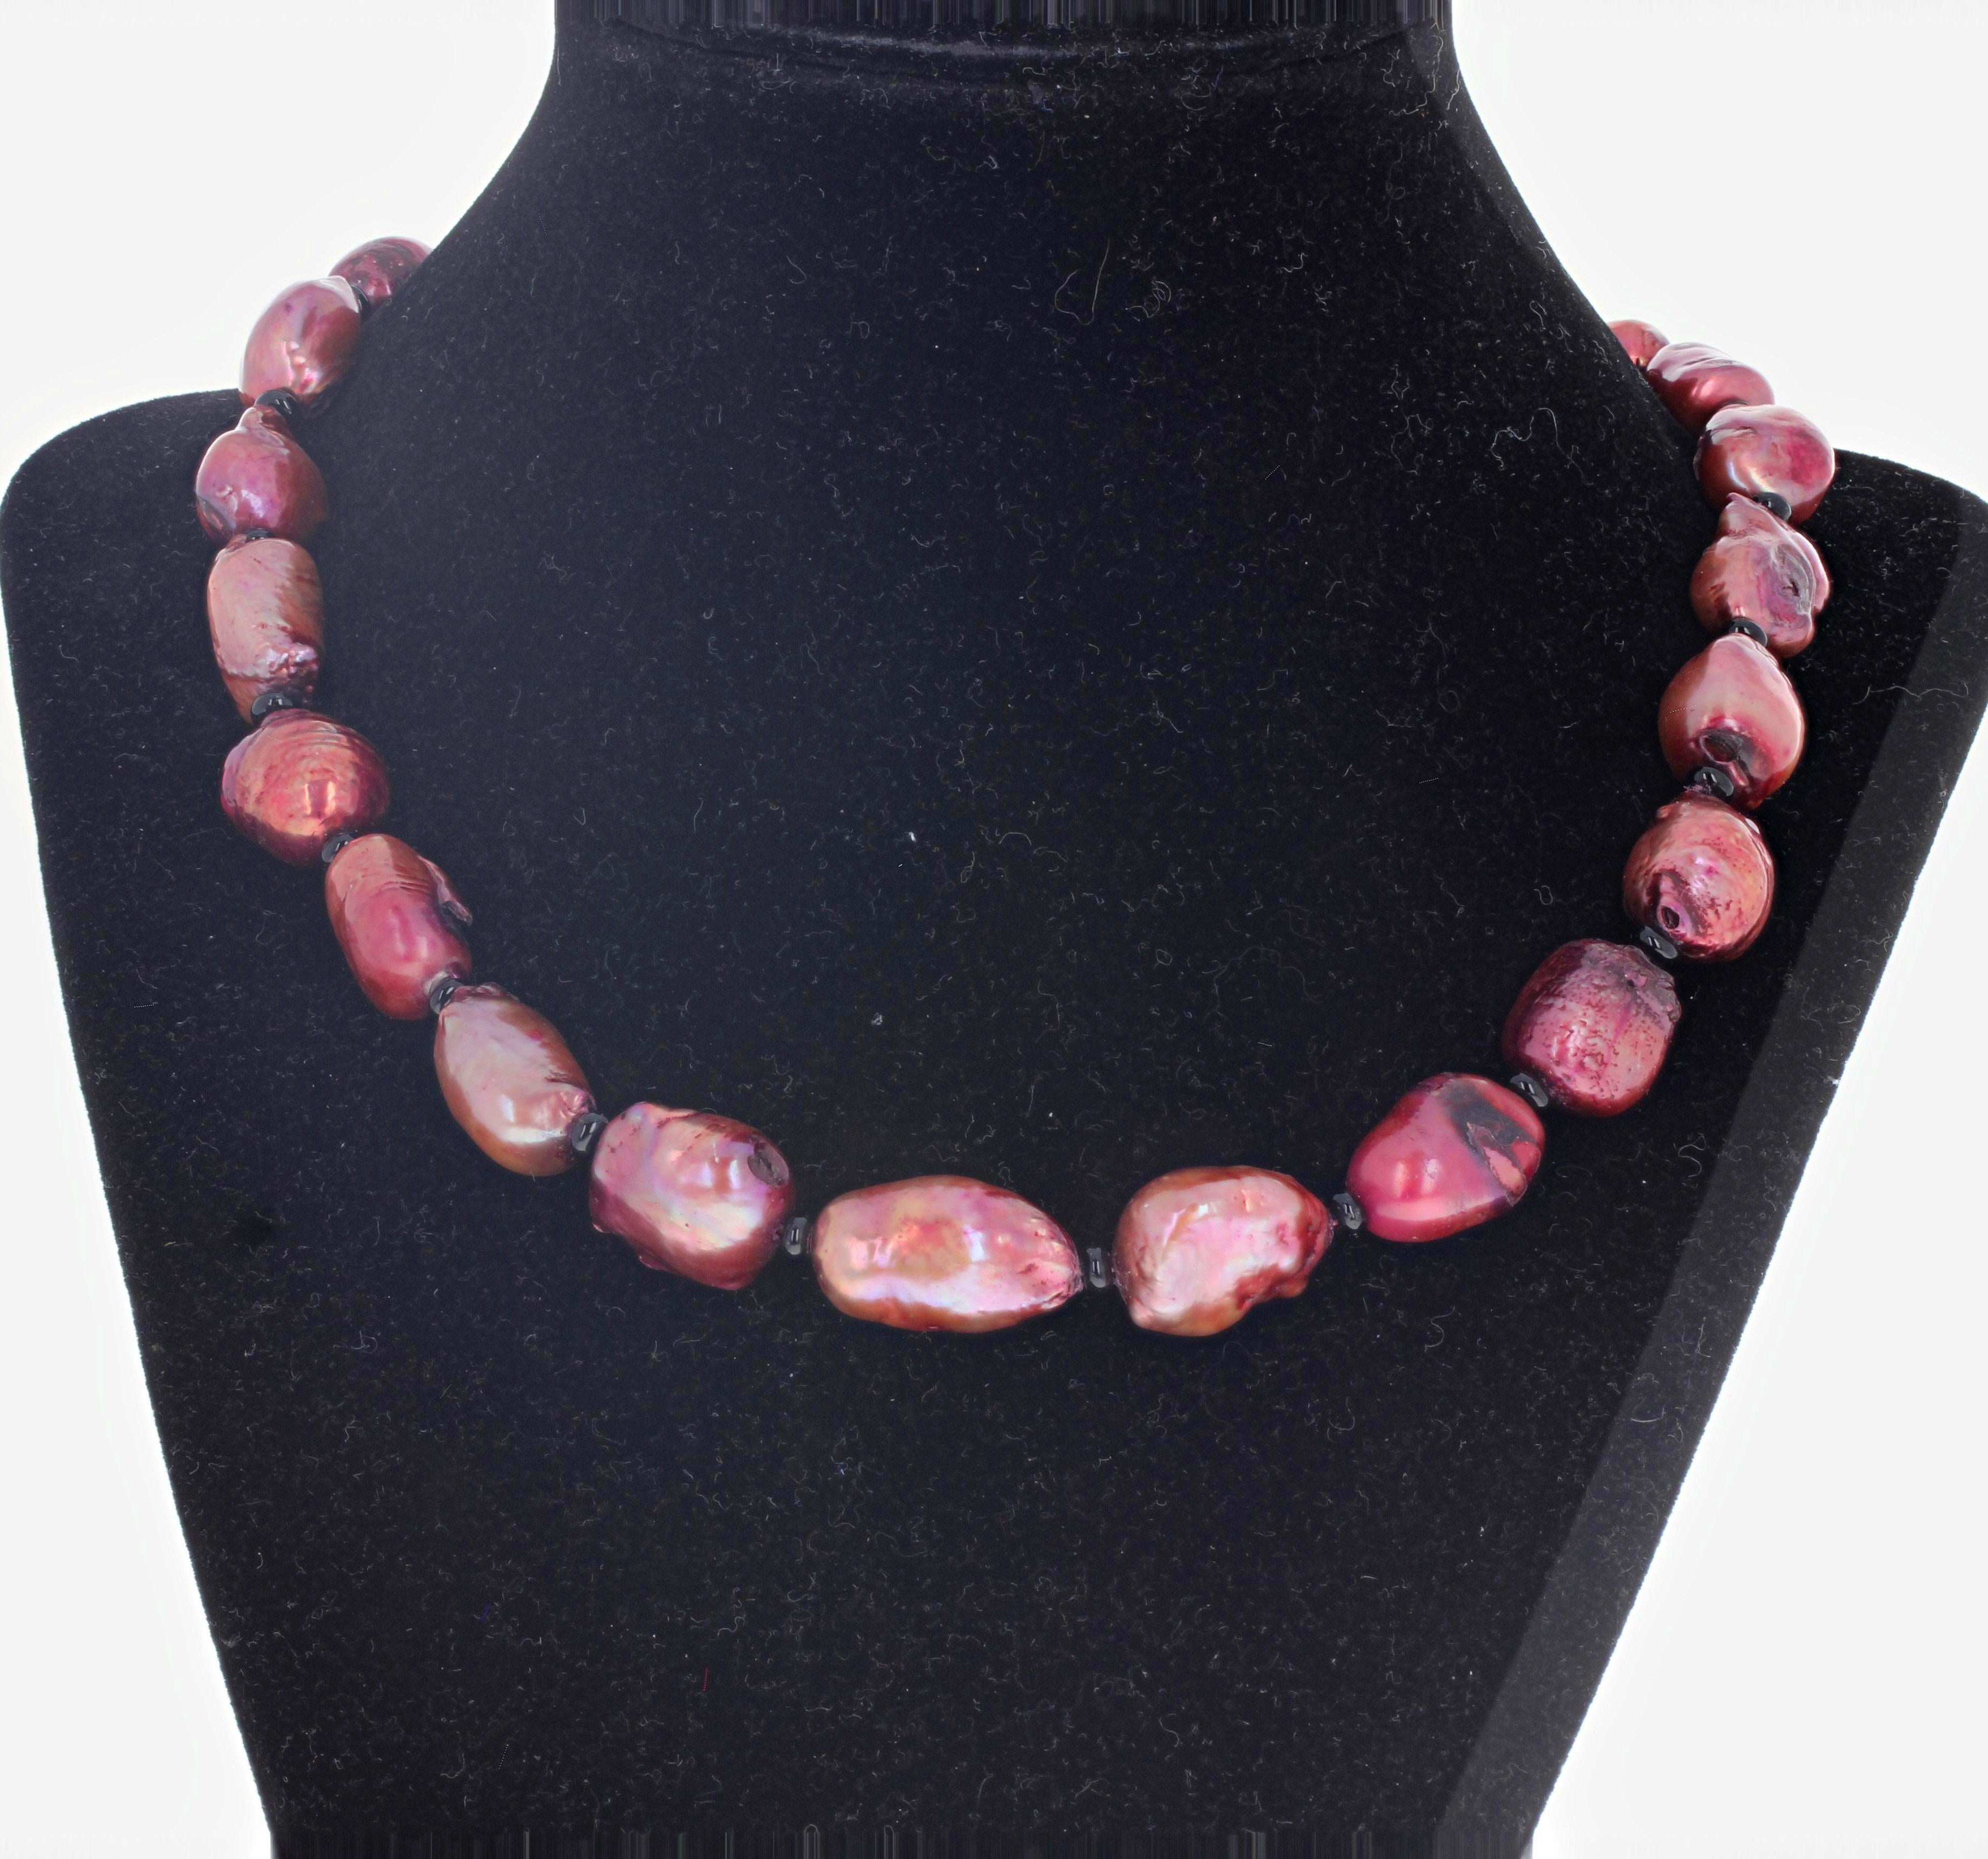 AJD Very Rare Glowing Coppery Pink Cultured Pearl Necklace For Sale 2